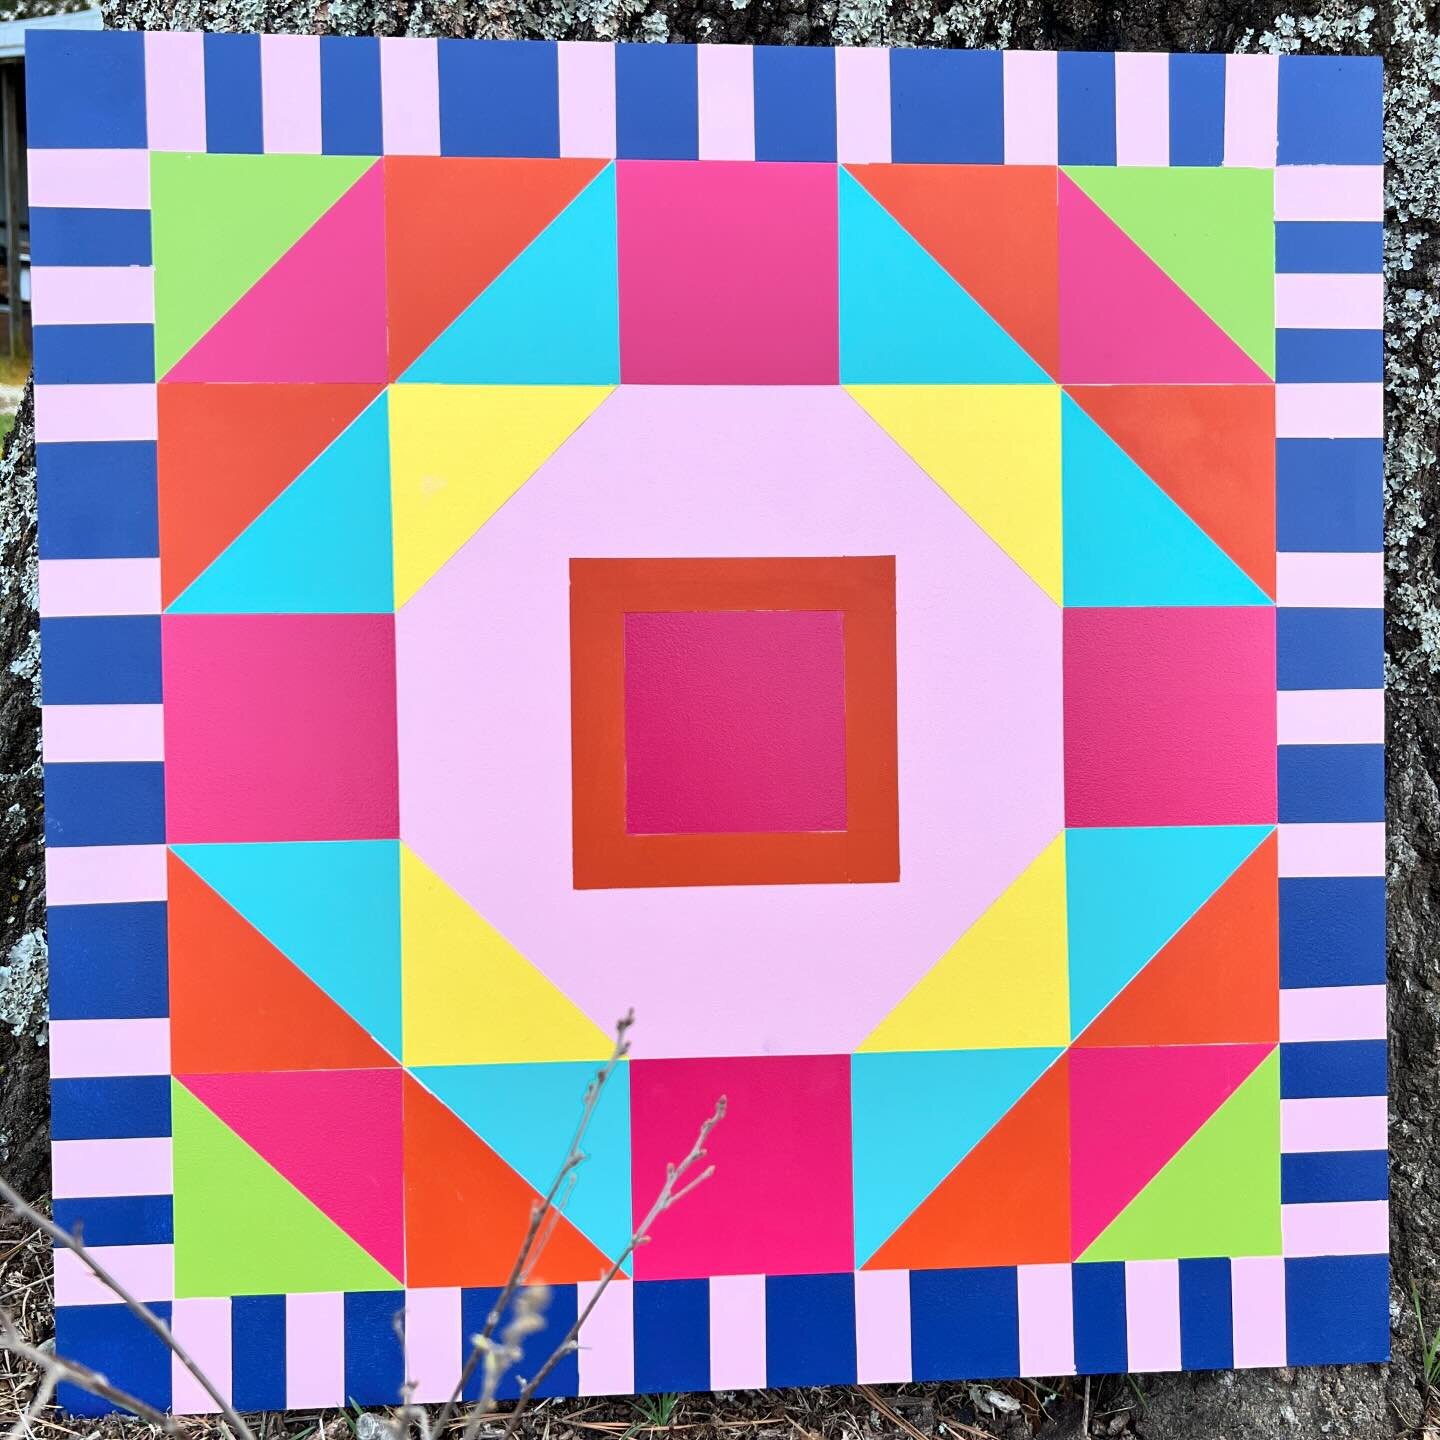 Did something a little different. Took a fun class by Red River Barn Quilt Trail on Saturday with my sweet friend @onequiltjuan. We painted outdoor quilt block signs. My block was inspired by an old quilt square I had in my stash. But in my quirky st